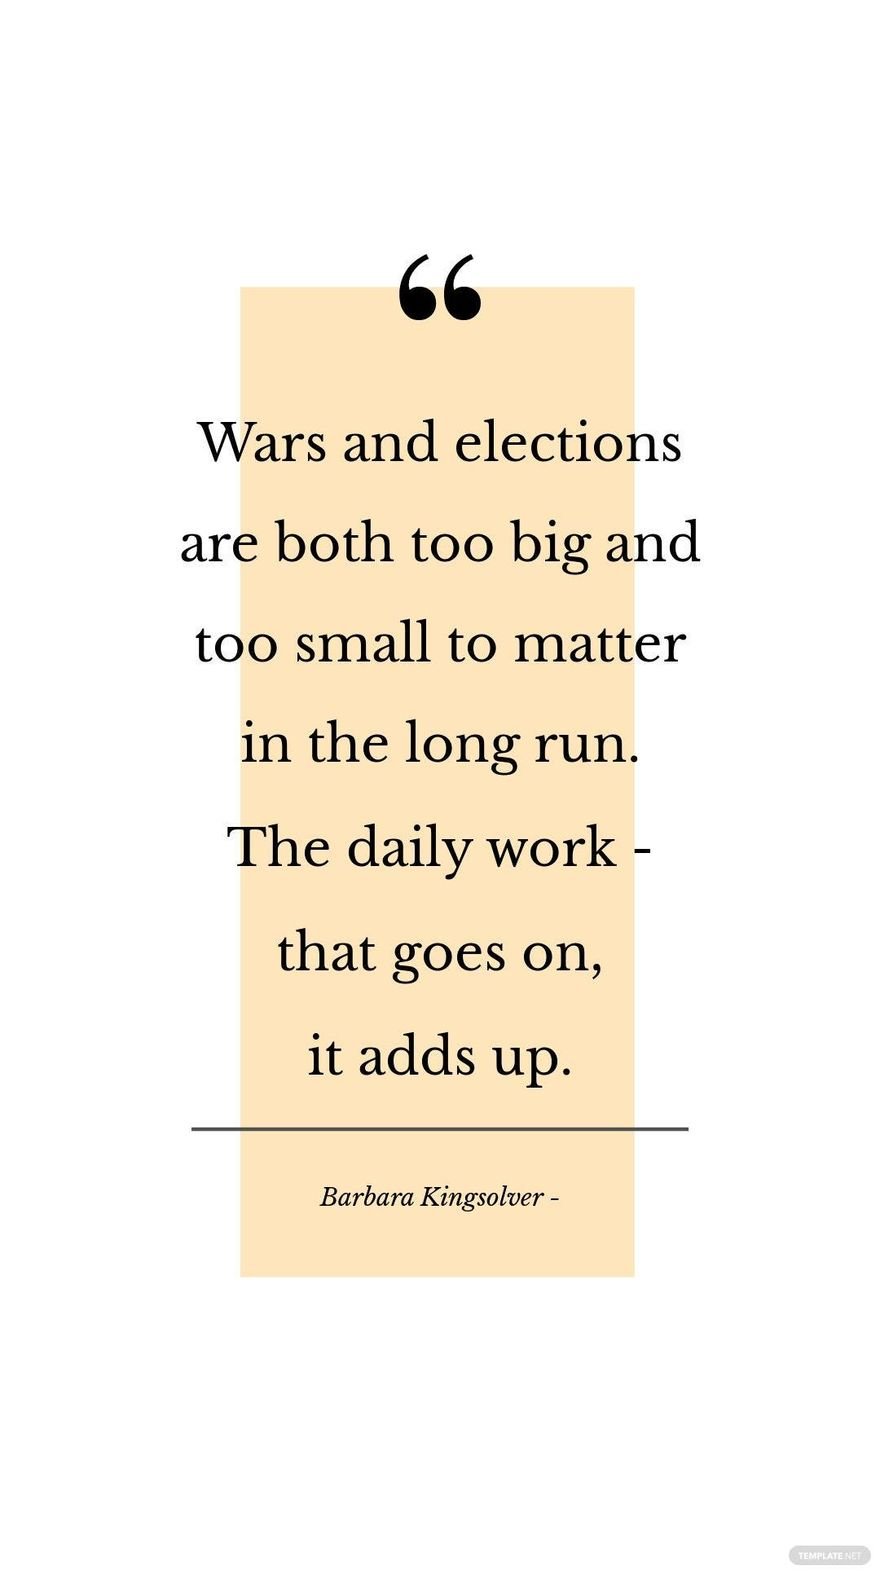 Barbara Kingsolver - Wars and elections are both too big and too small to matter in the long run. The daily work - that goes on, it adds up.